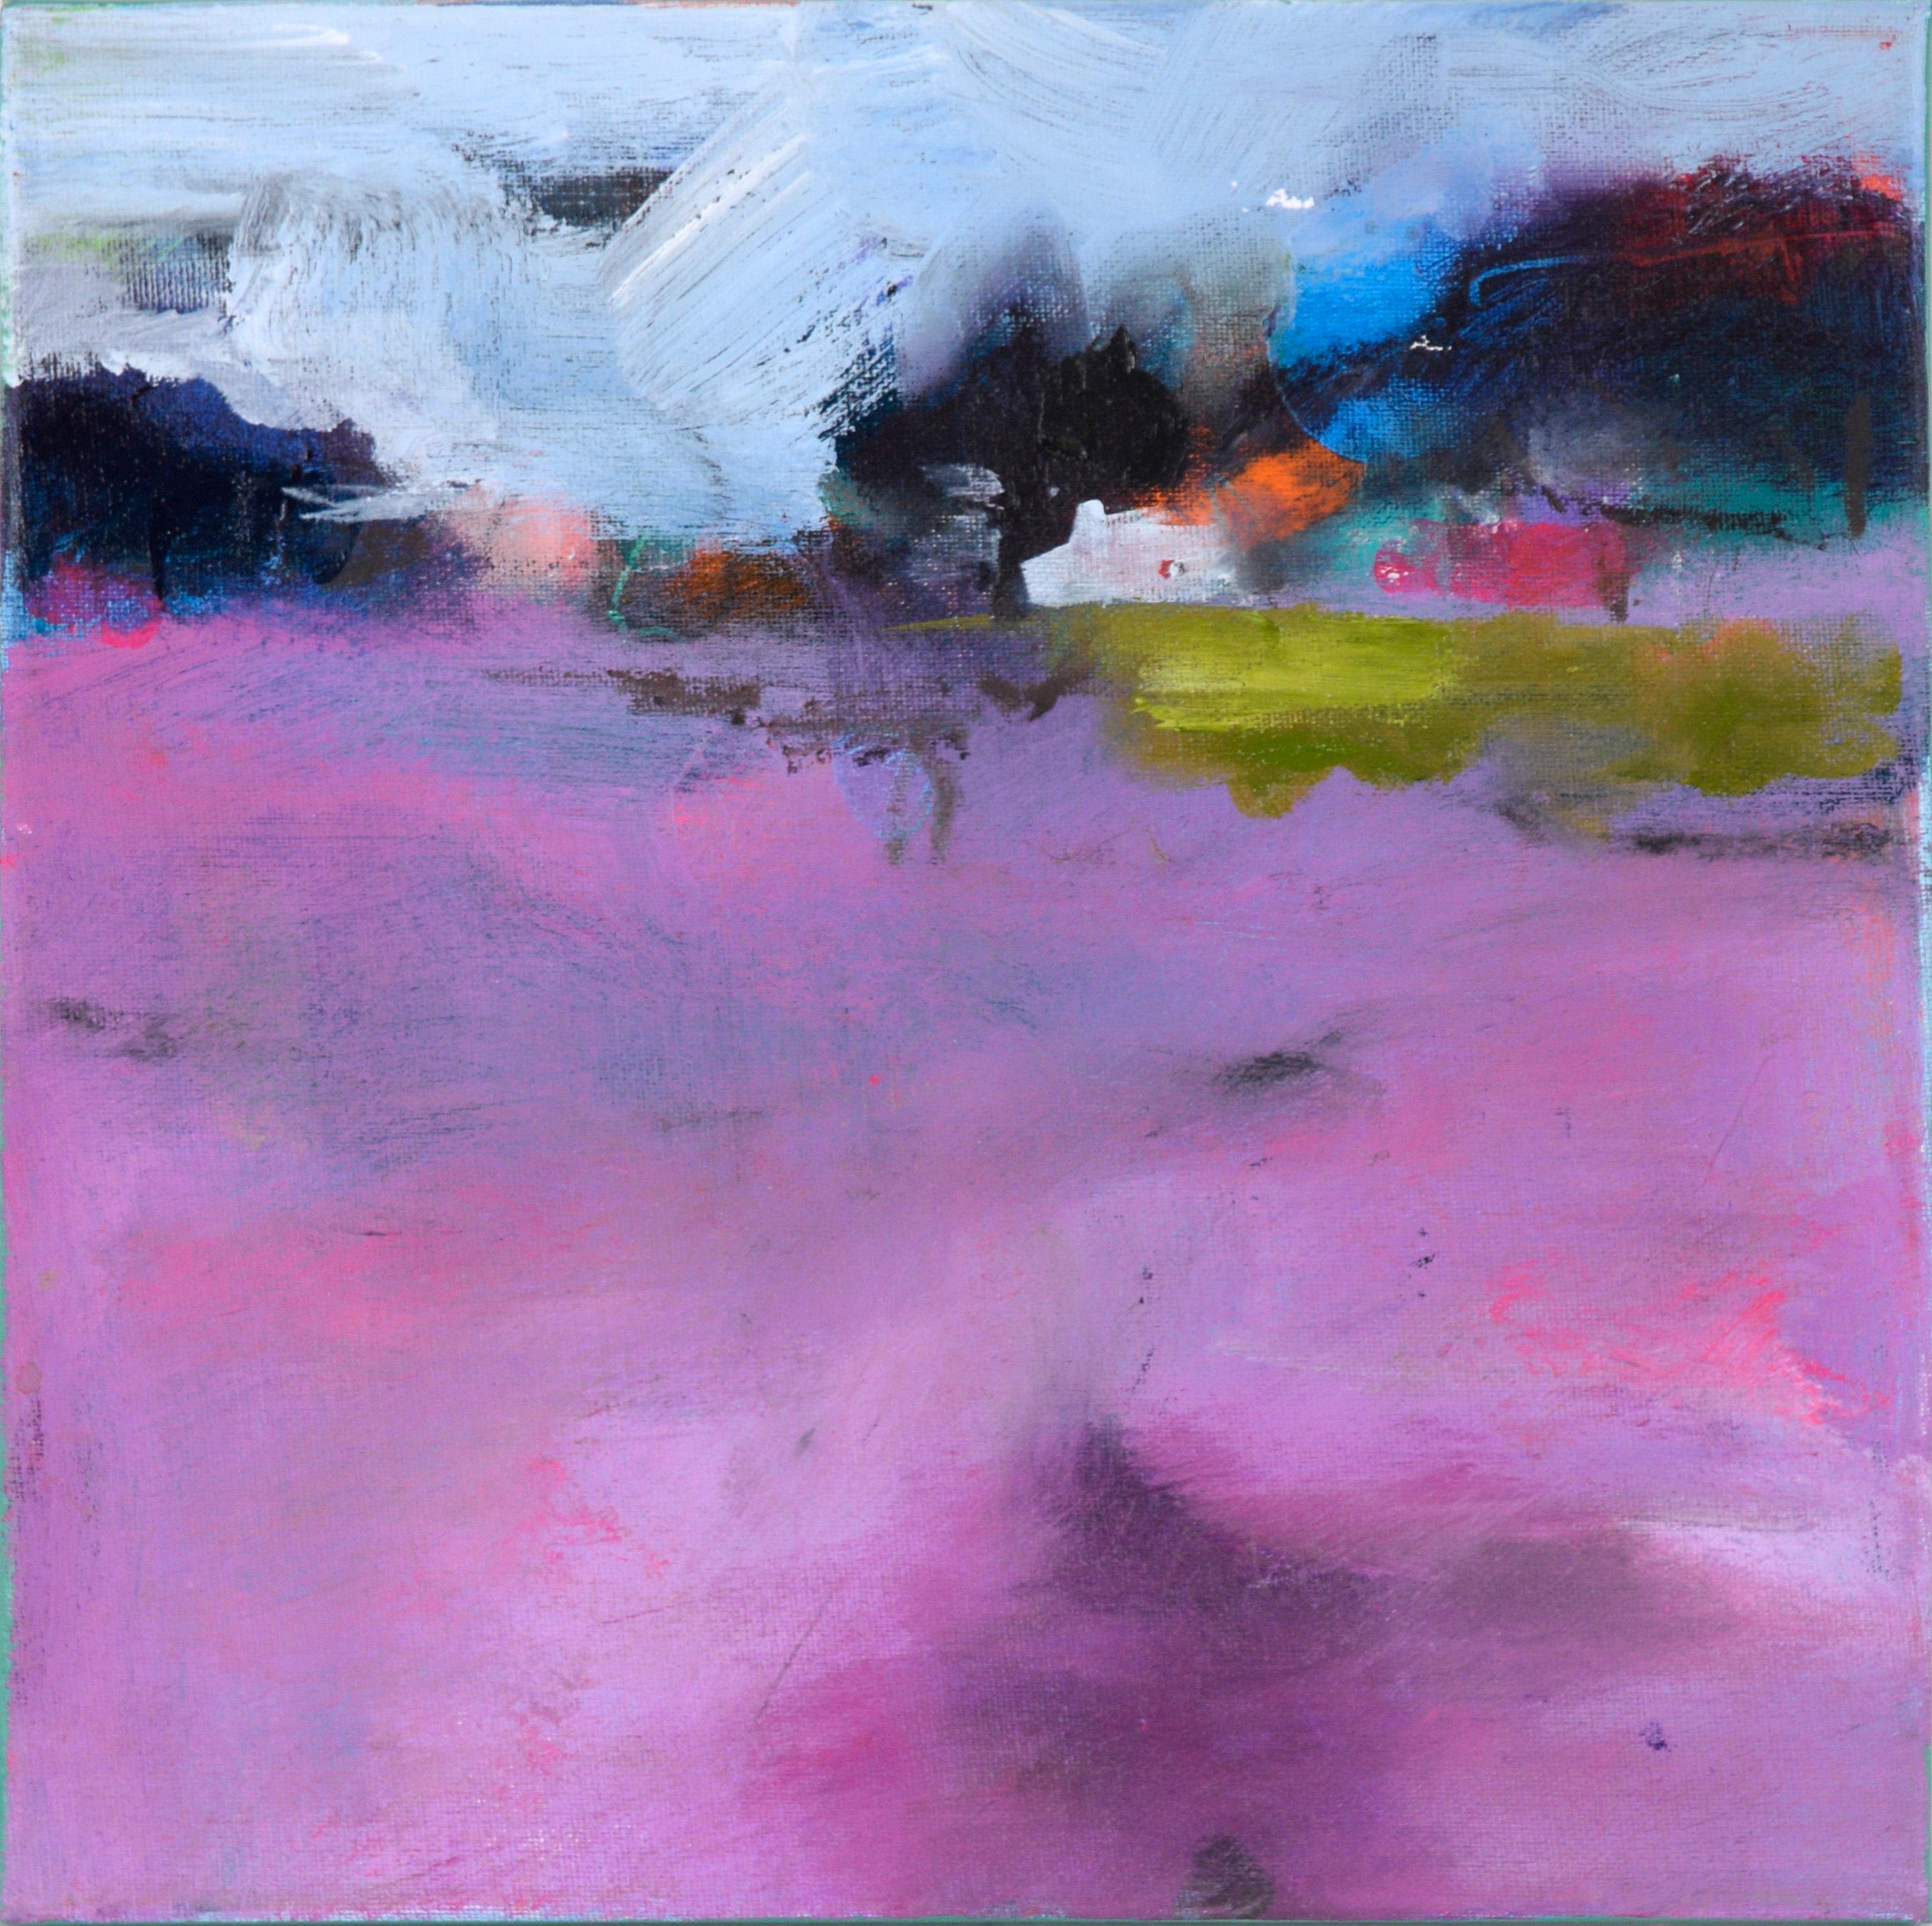 Lavender Field - Abstracted Landscape in Acrylic on Canvas